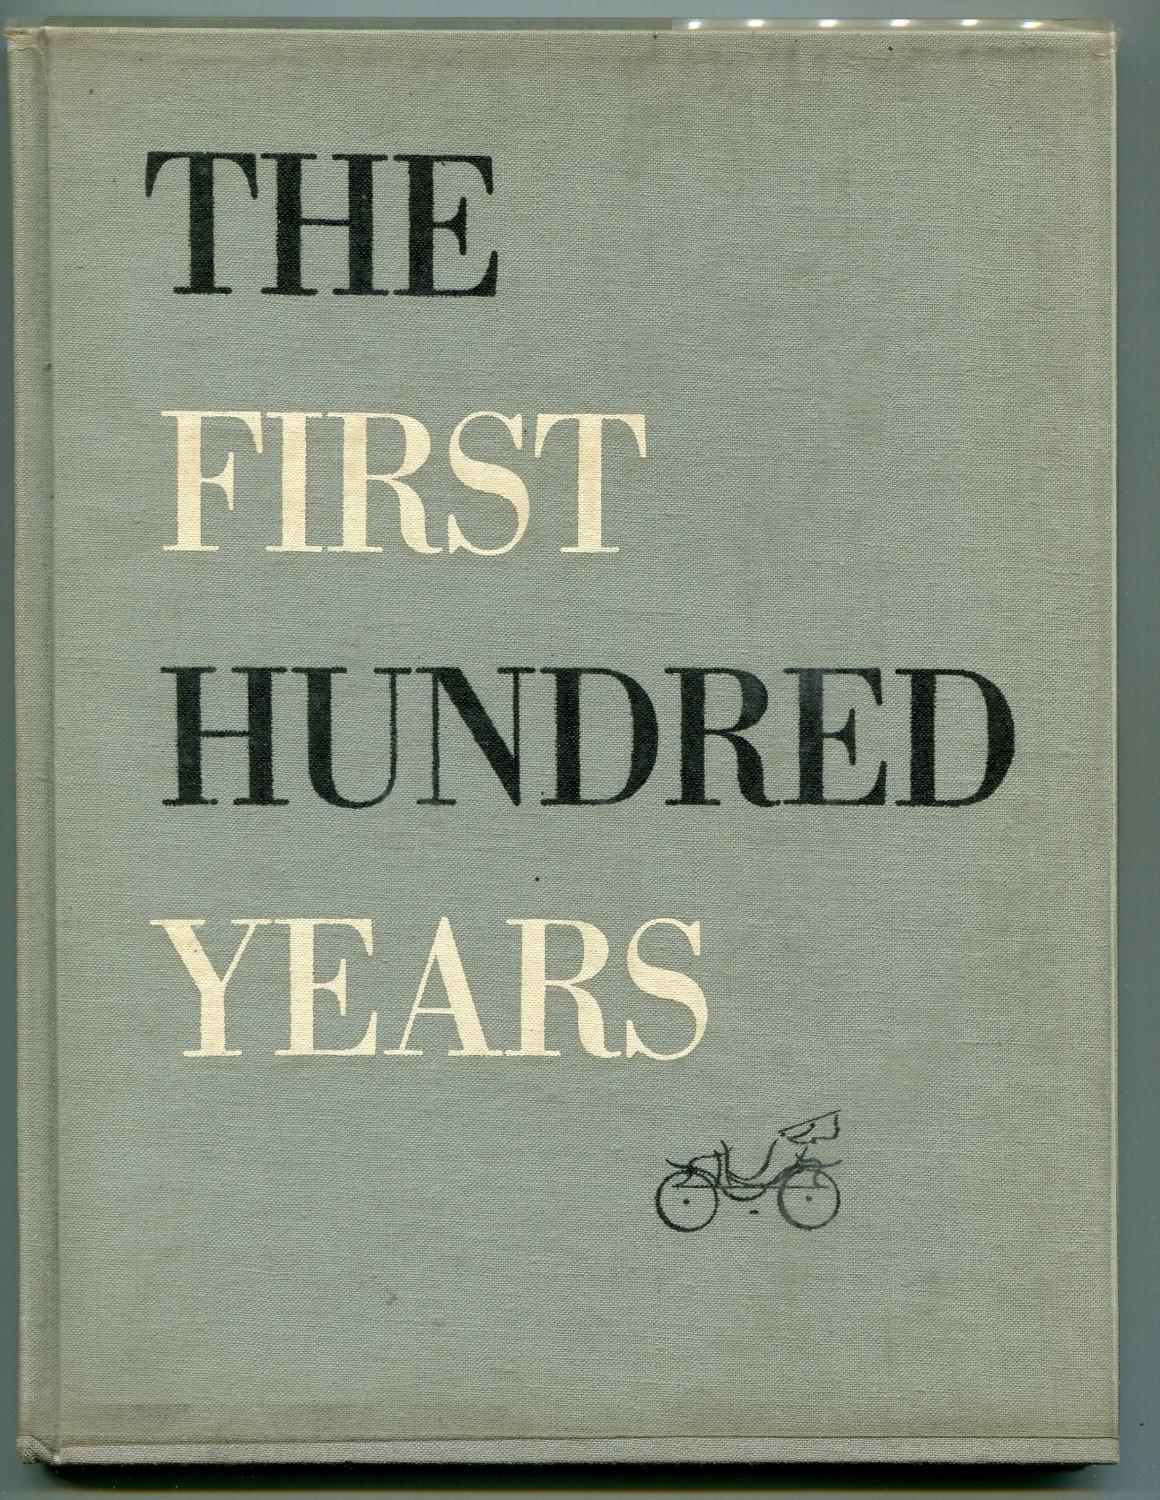 The First Hundred Years, eighteen fifty three to nineteen fifty three ...